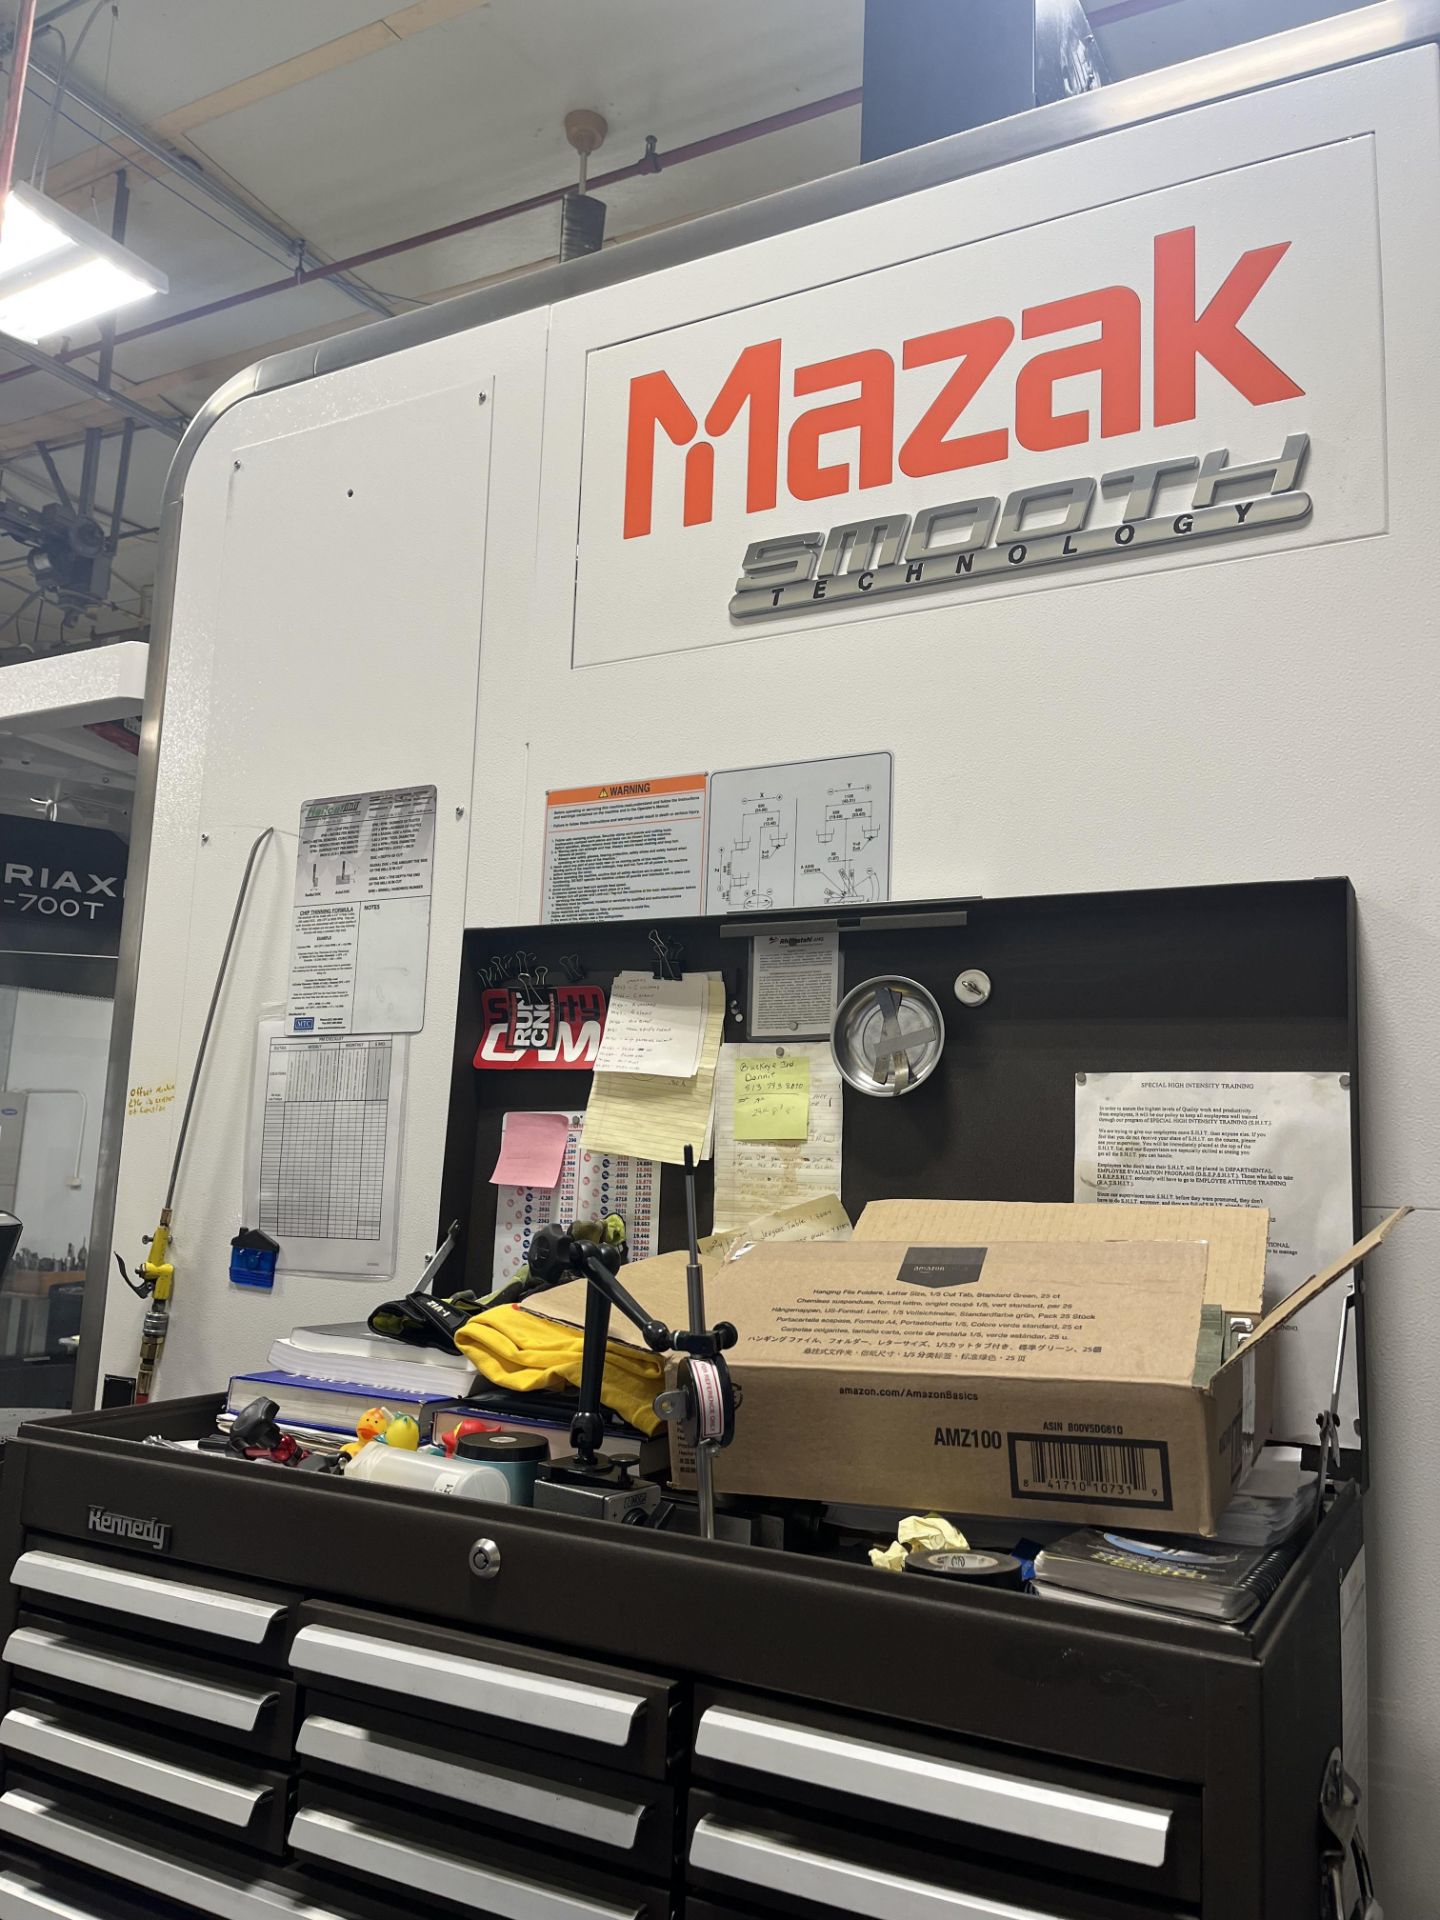 2019 MAZAK Variaxis I-700T 5-Axis CNC Vertical Machining Center with Mill Turn Option & 2 Pallets - Image 4 of 11